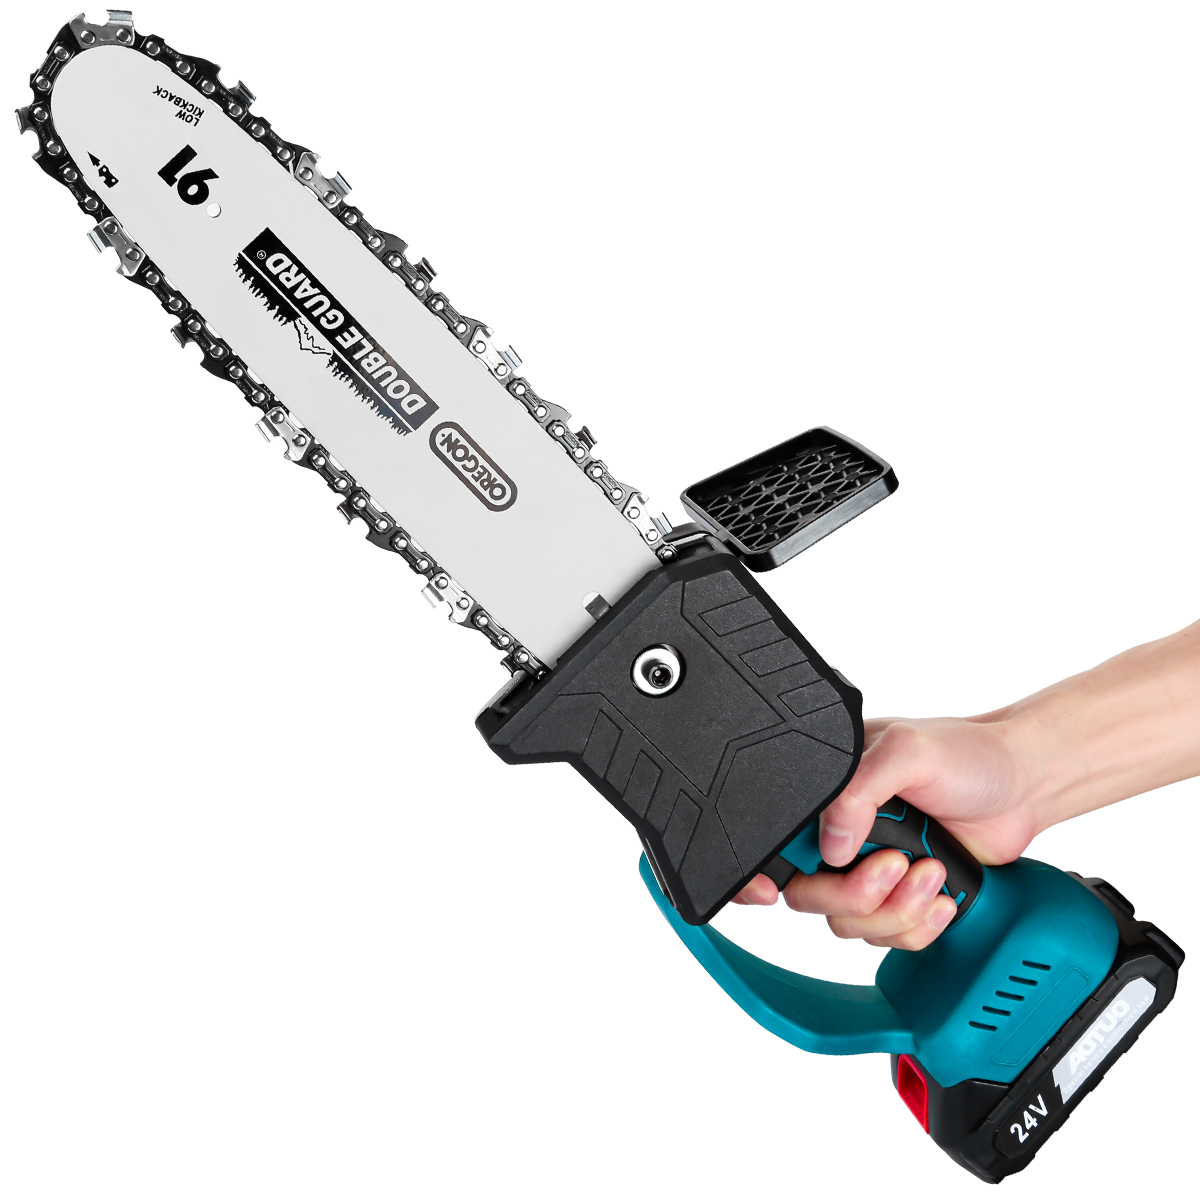 550W Mini Electric Chain Saw One-Hand Woodworking Lithium Battery Pruning Chainsaw Wood Cutter Cordless also Rechargeable (imported)